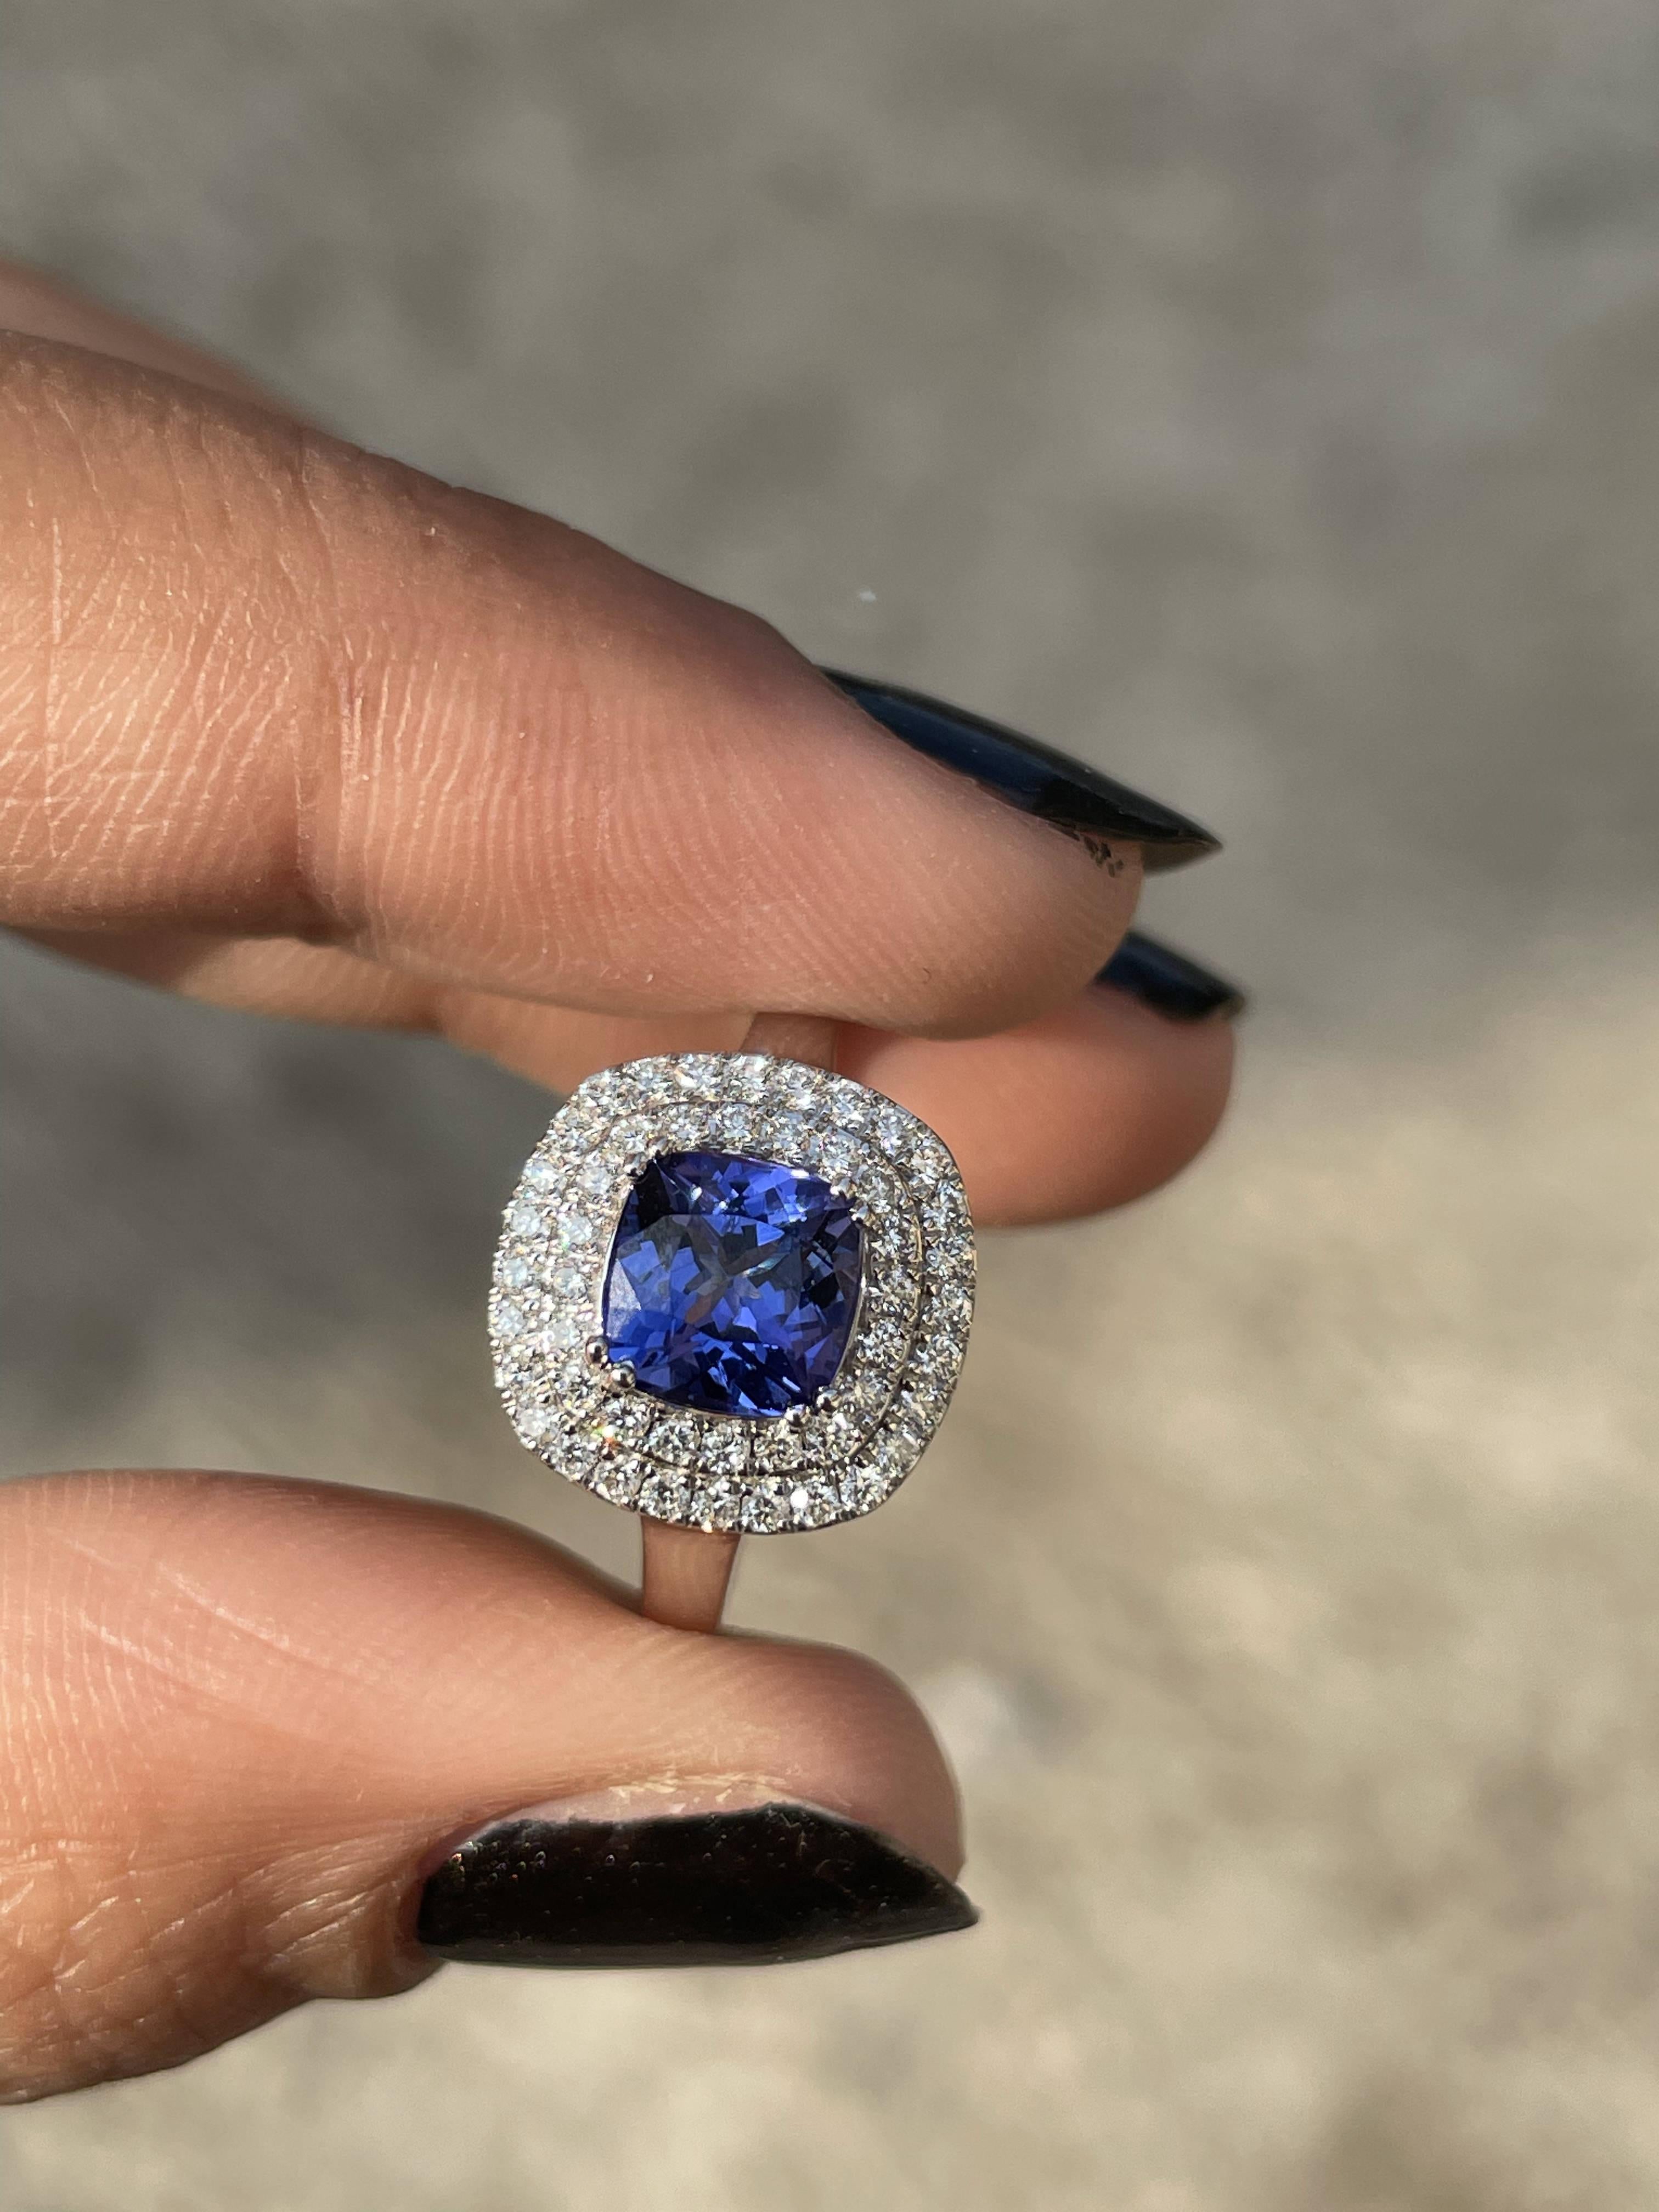 For Sale:  18k Solid White Gold Cushion Cut 1.2 Ct Tanzanite Diamond Ring for Women 11